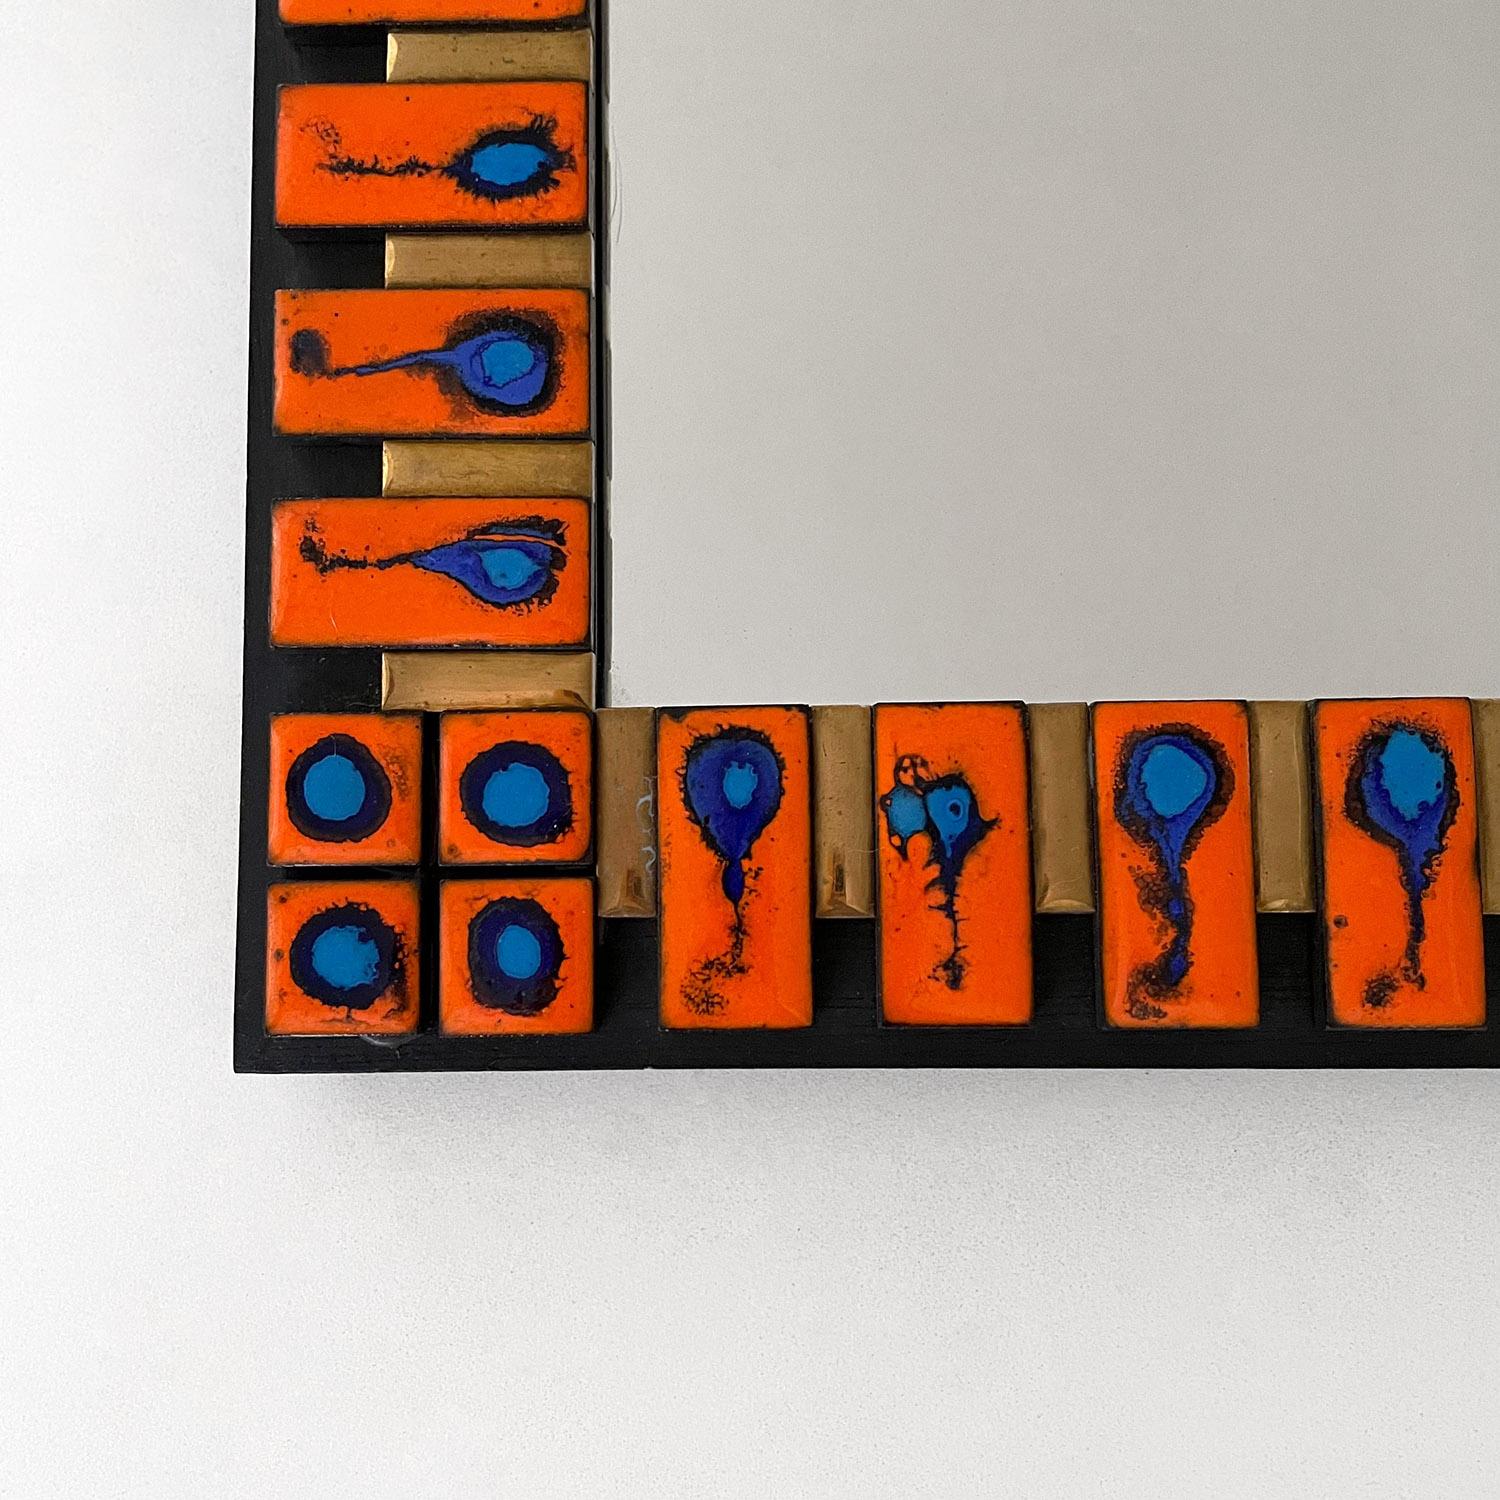 French ceramic tiled mirror in the style of François Lembo
France, circa 1960s
Bold statement mirror comprised of handmade ceramic tiles
Vibrant orange perfectly contrasts the deep ocean blue accents
Matte gold interior lines the black iron